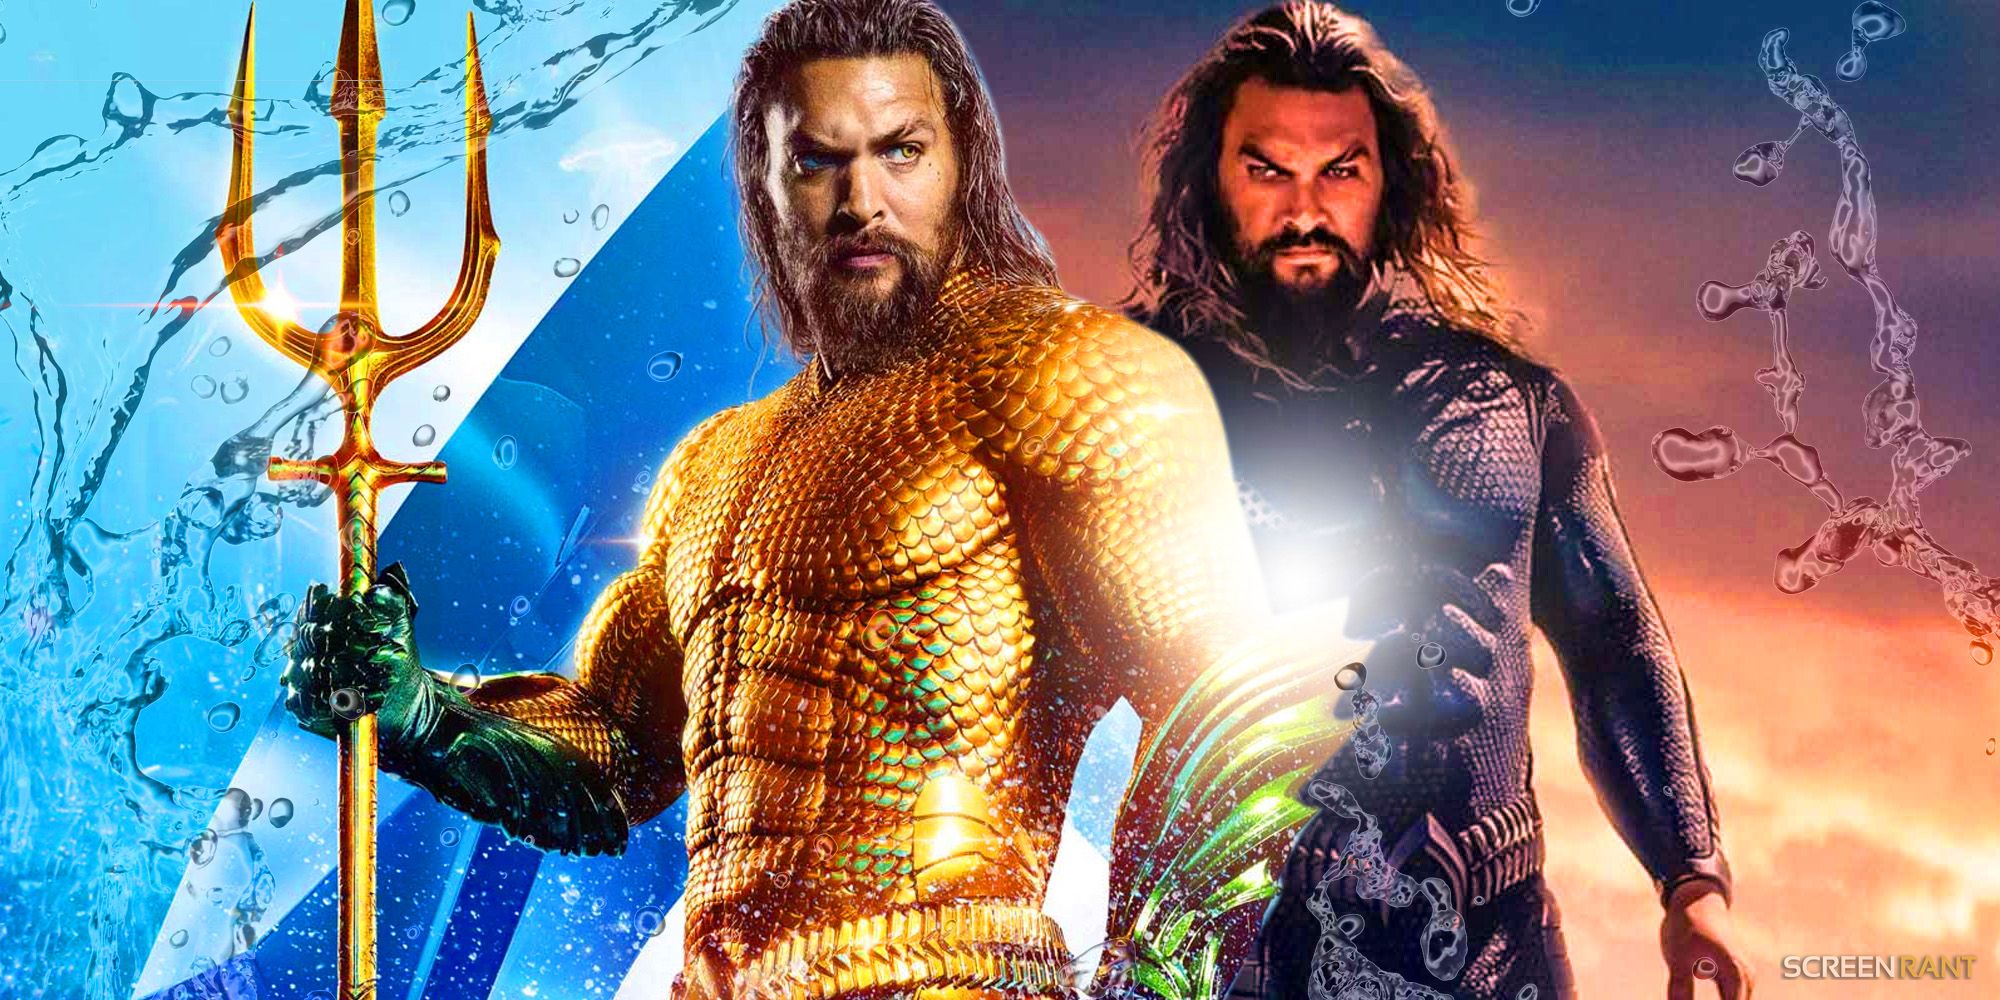 Composite of Jason Momoa As Aquaman In Gold And Green Suit With Jason Momoa As Aquaman In All Black Costume In Aquaman and the Lost Kingdom